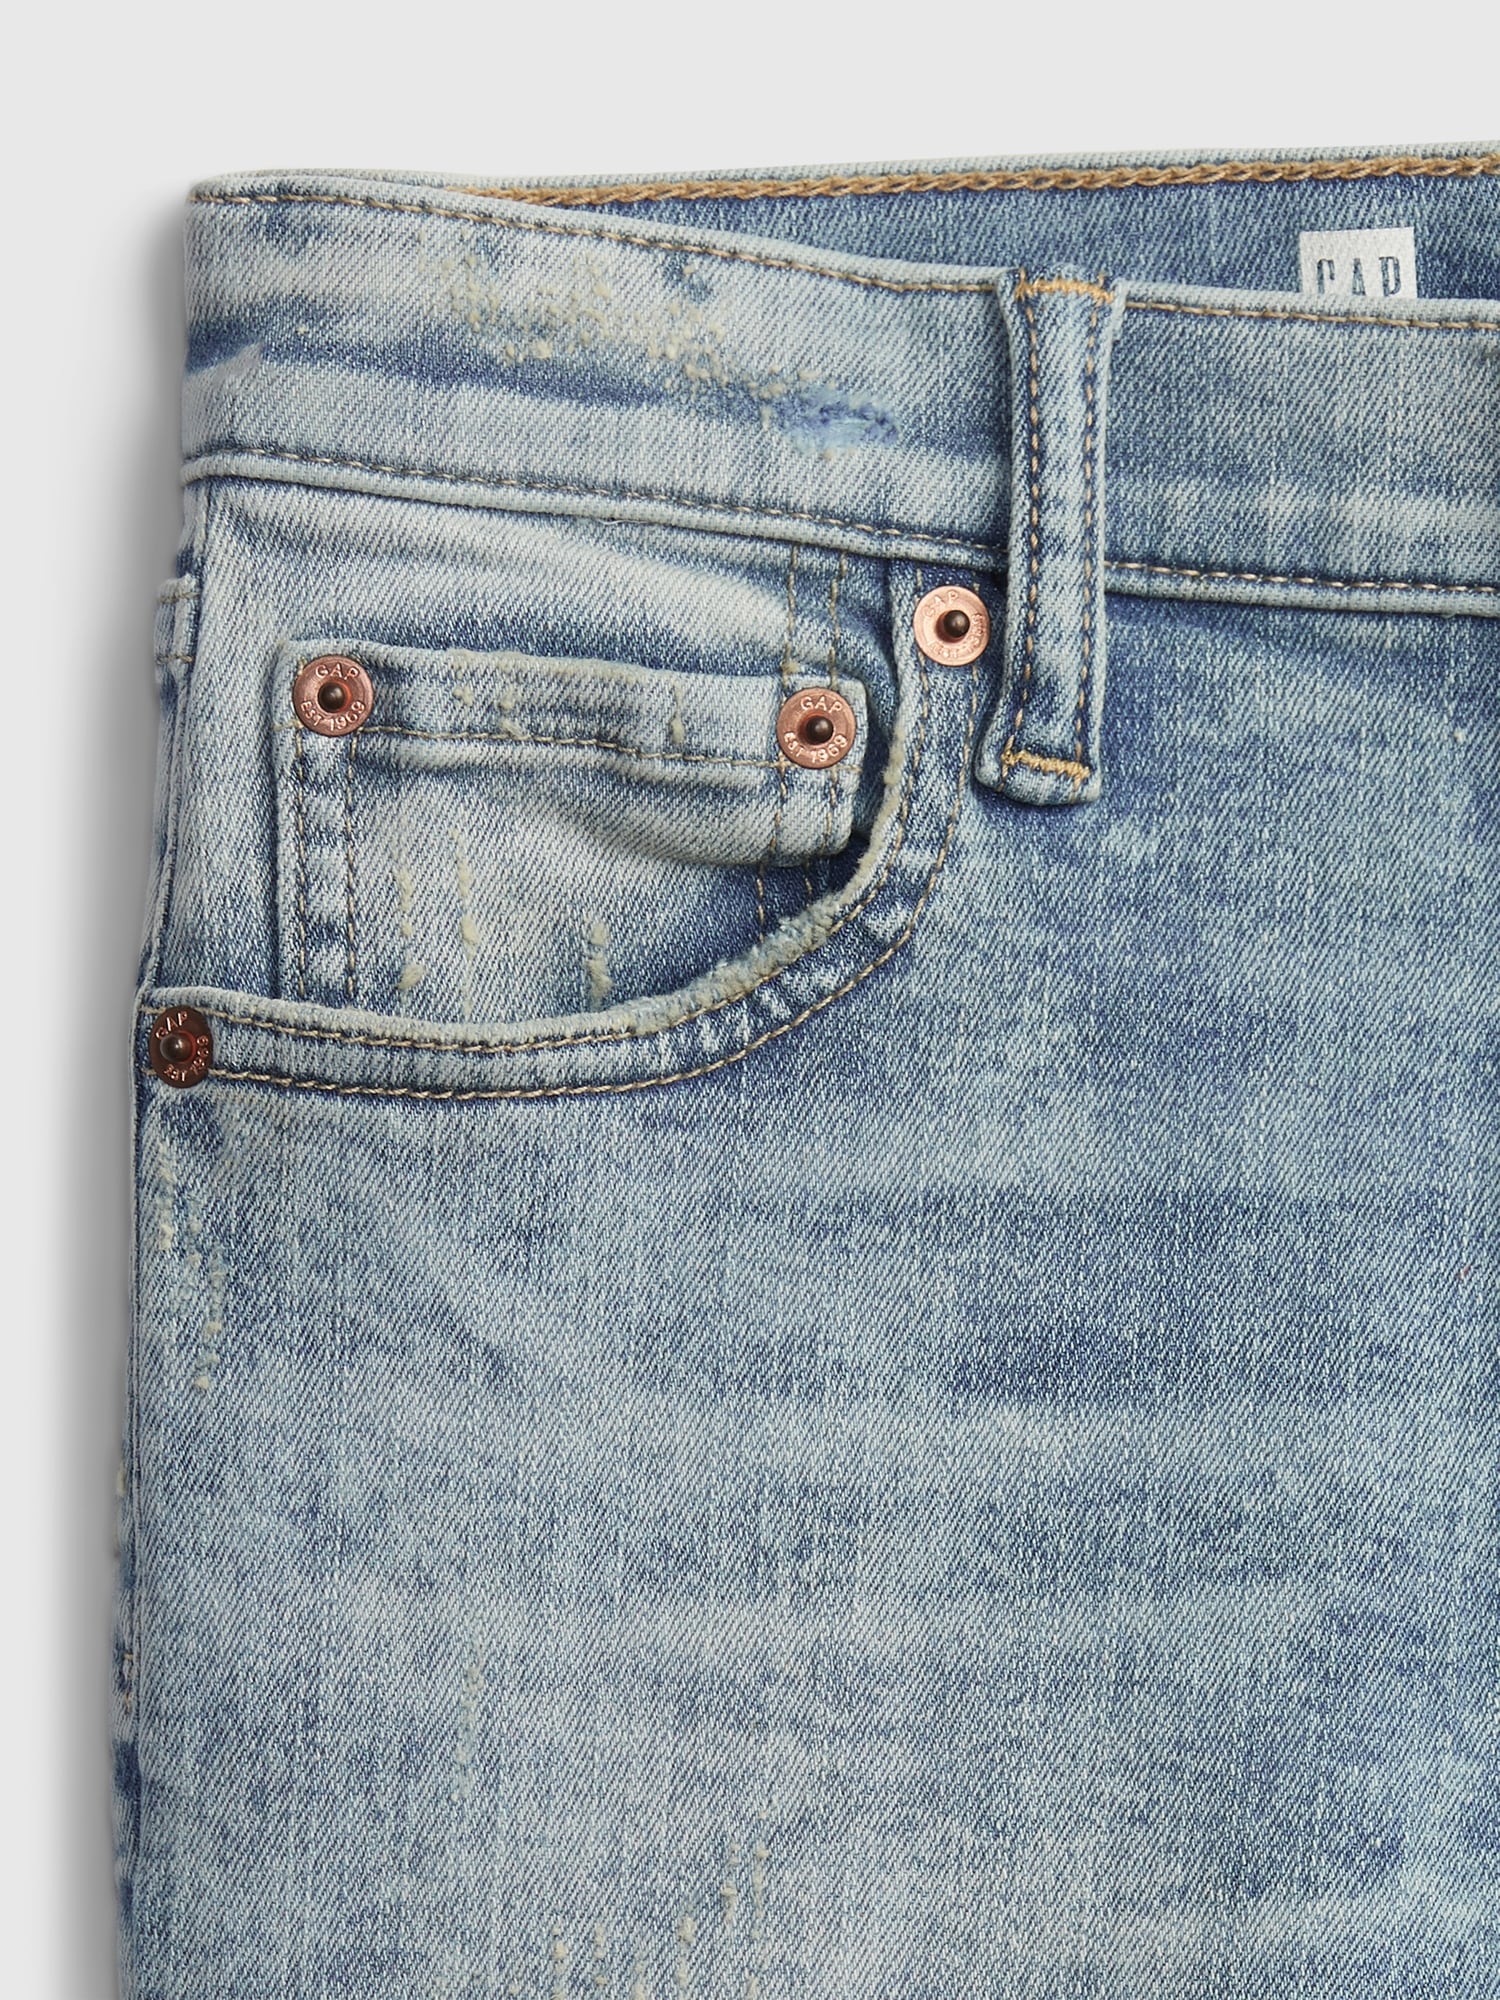 Teen Stacked Ankle Skinny Jeans | Gap Washwell™ with